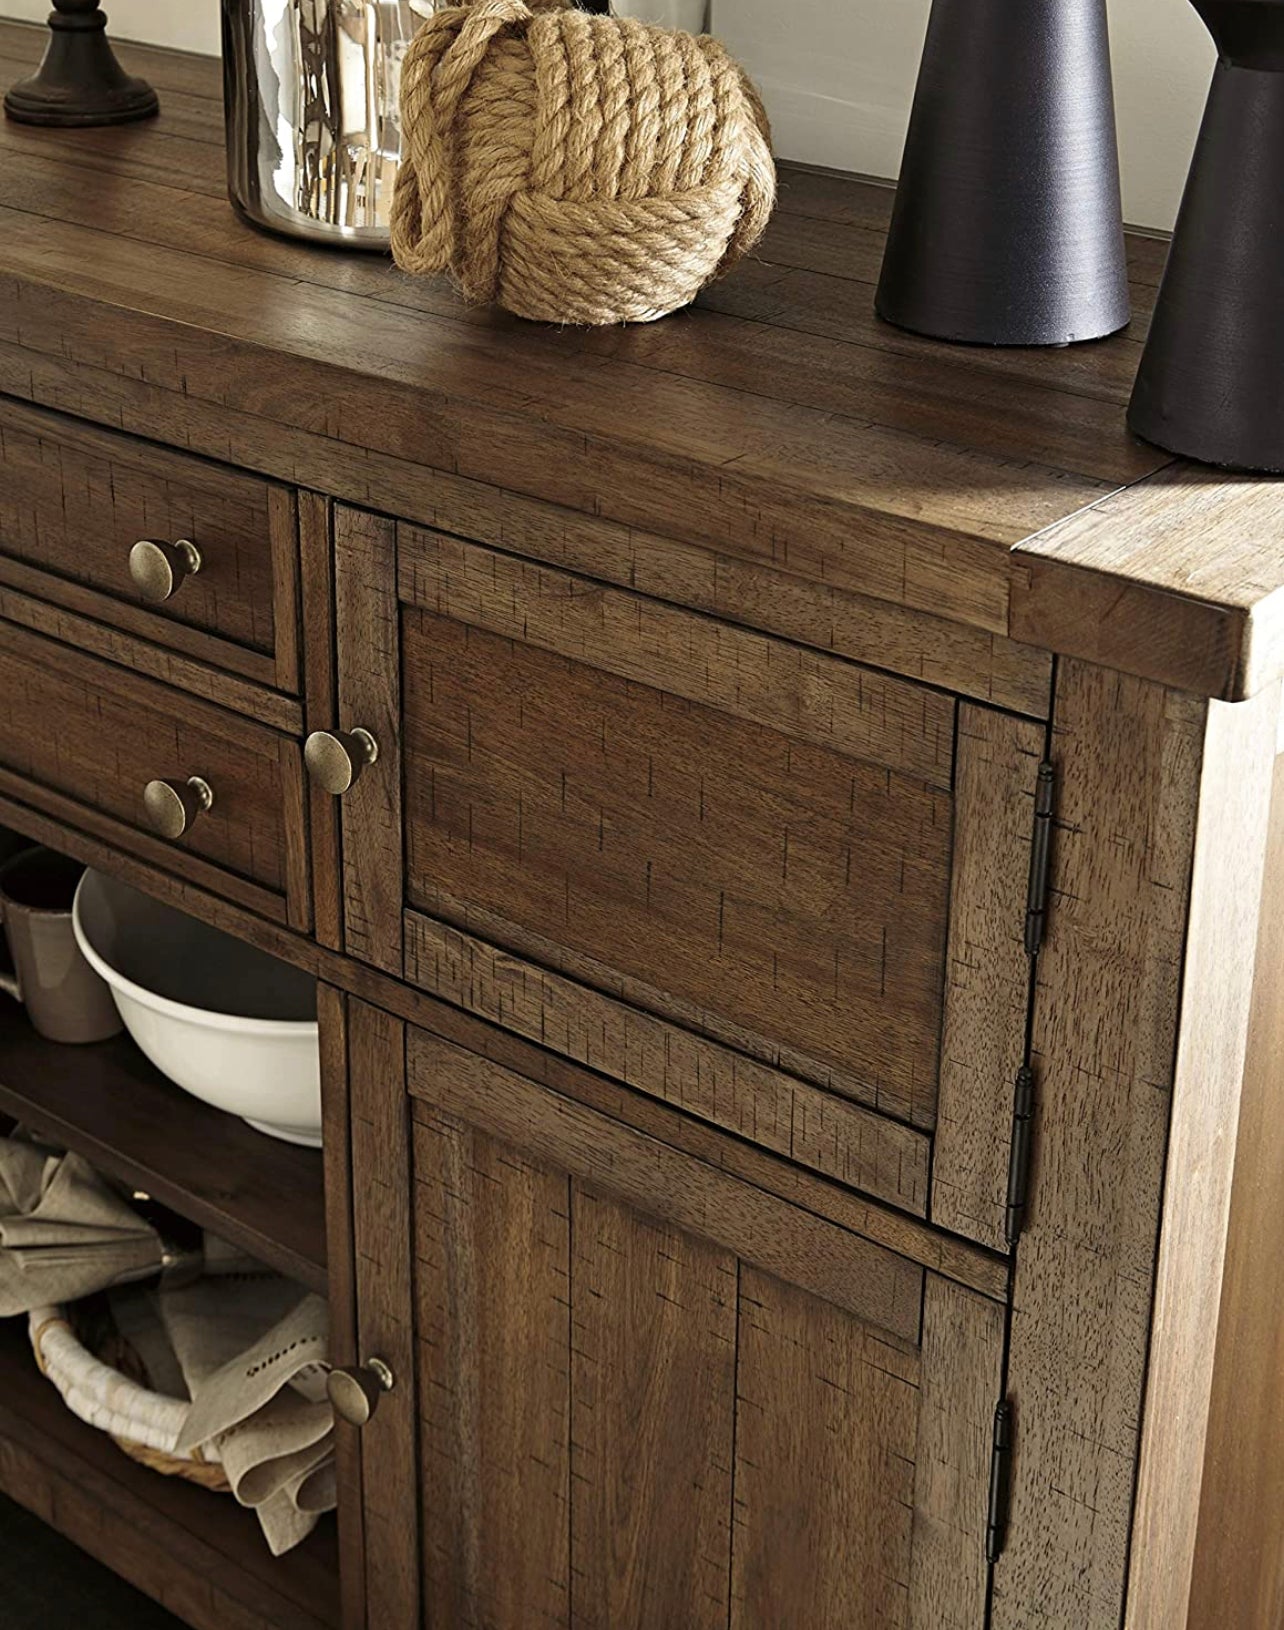 Signature Design by Ashley Moriville Rustic Dining Room Buffet, Brown - $525